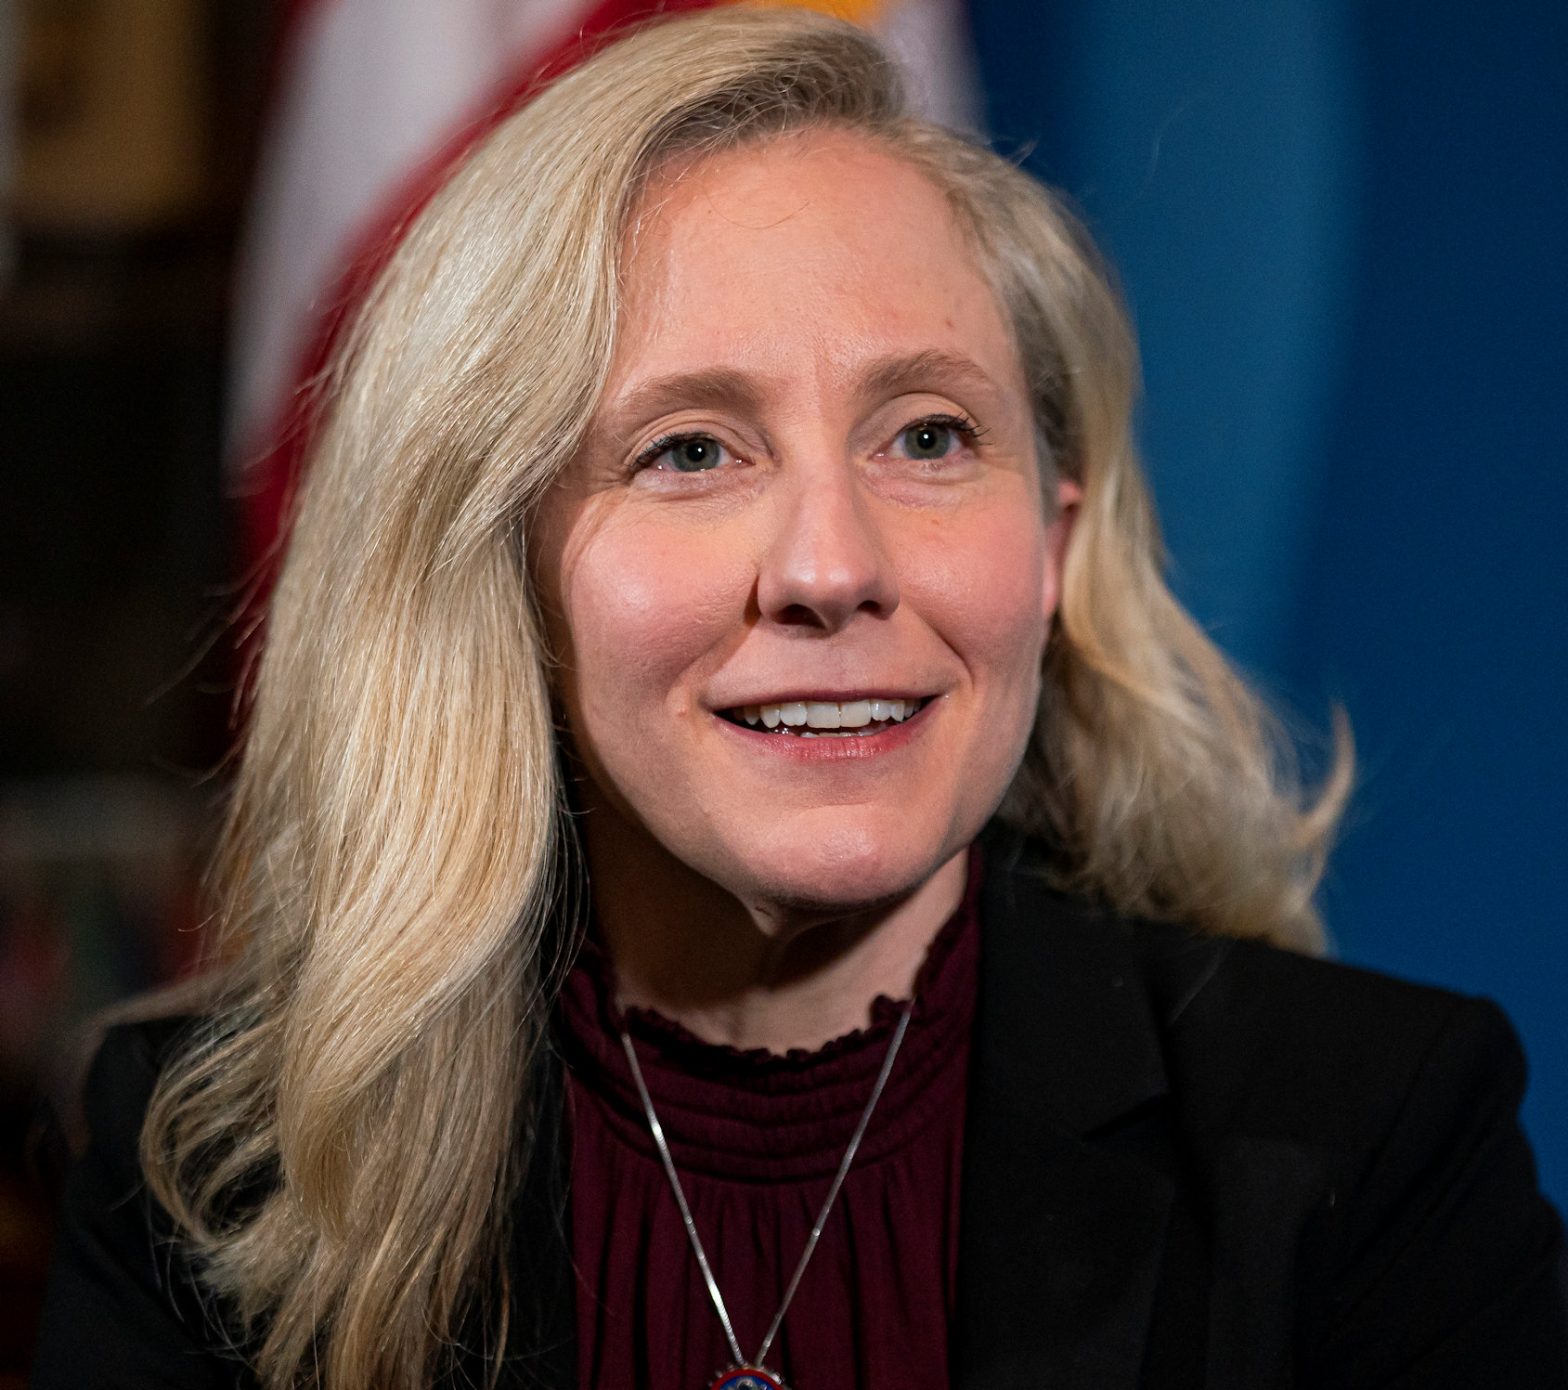 Virginia Rep. Abigail Spanberger Running for Governor Instead of Seeking Reelection to House